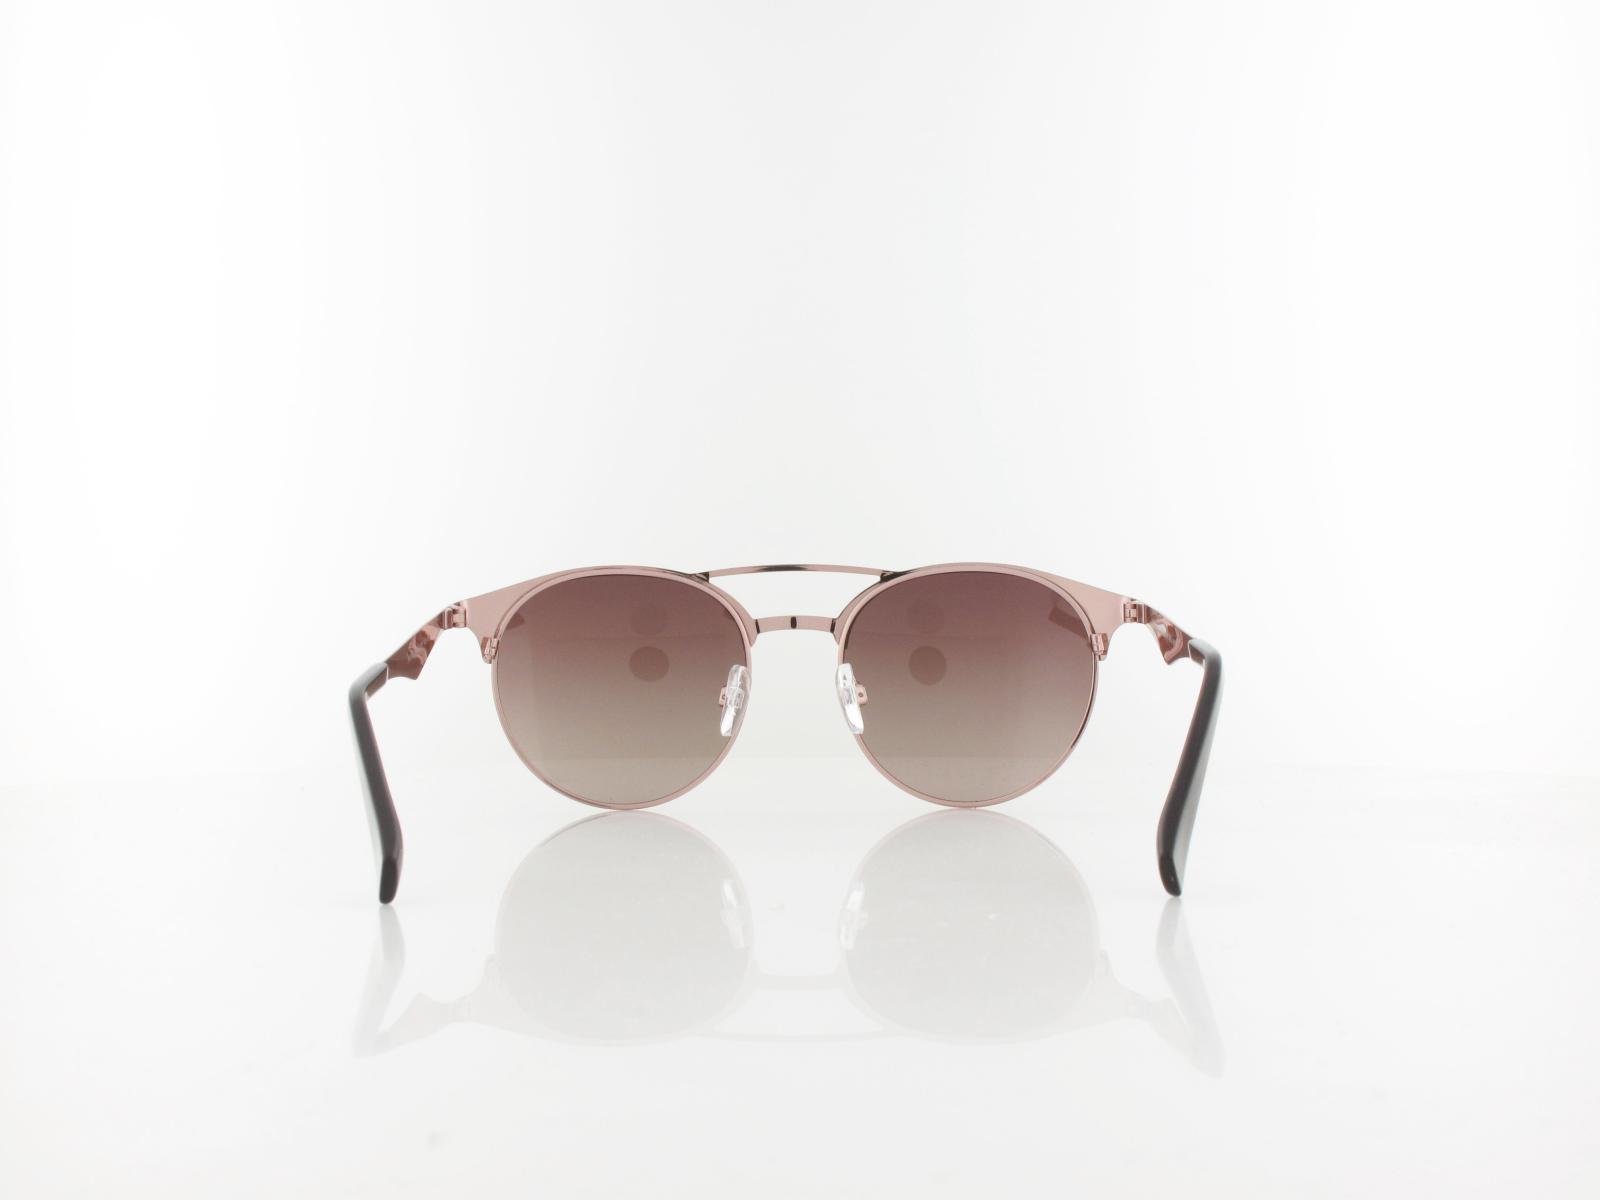 HIS polarized | HPS94108-2 53 | brown / brown gradient with silver flash polarized